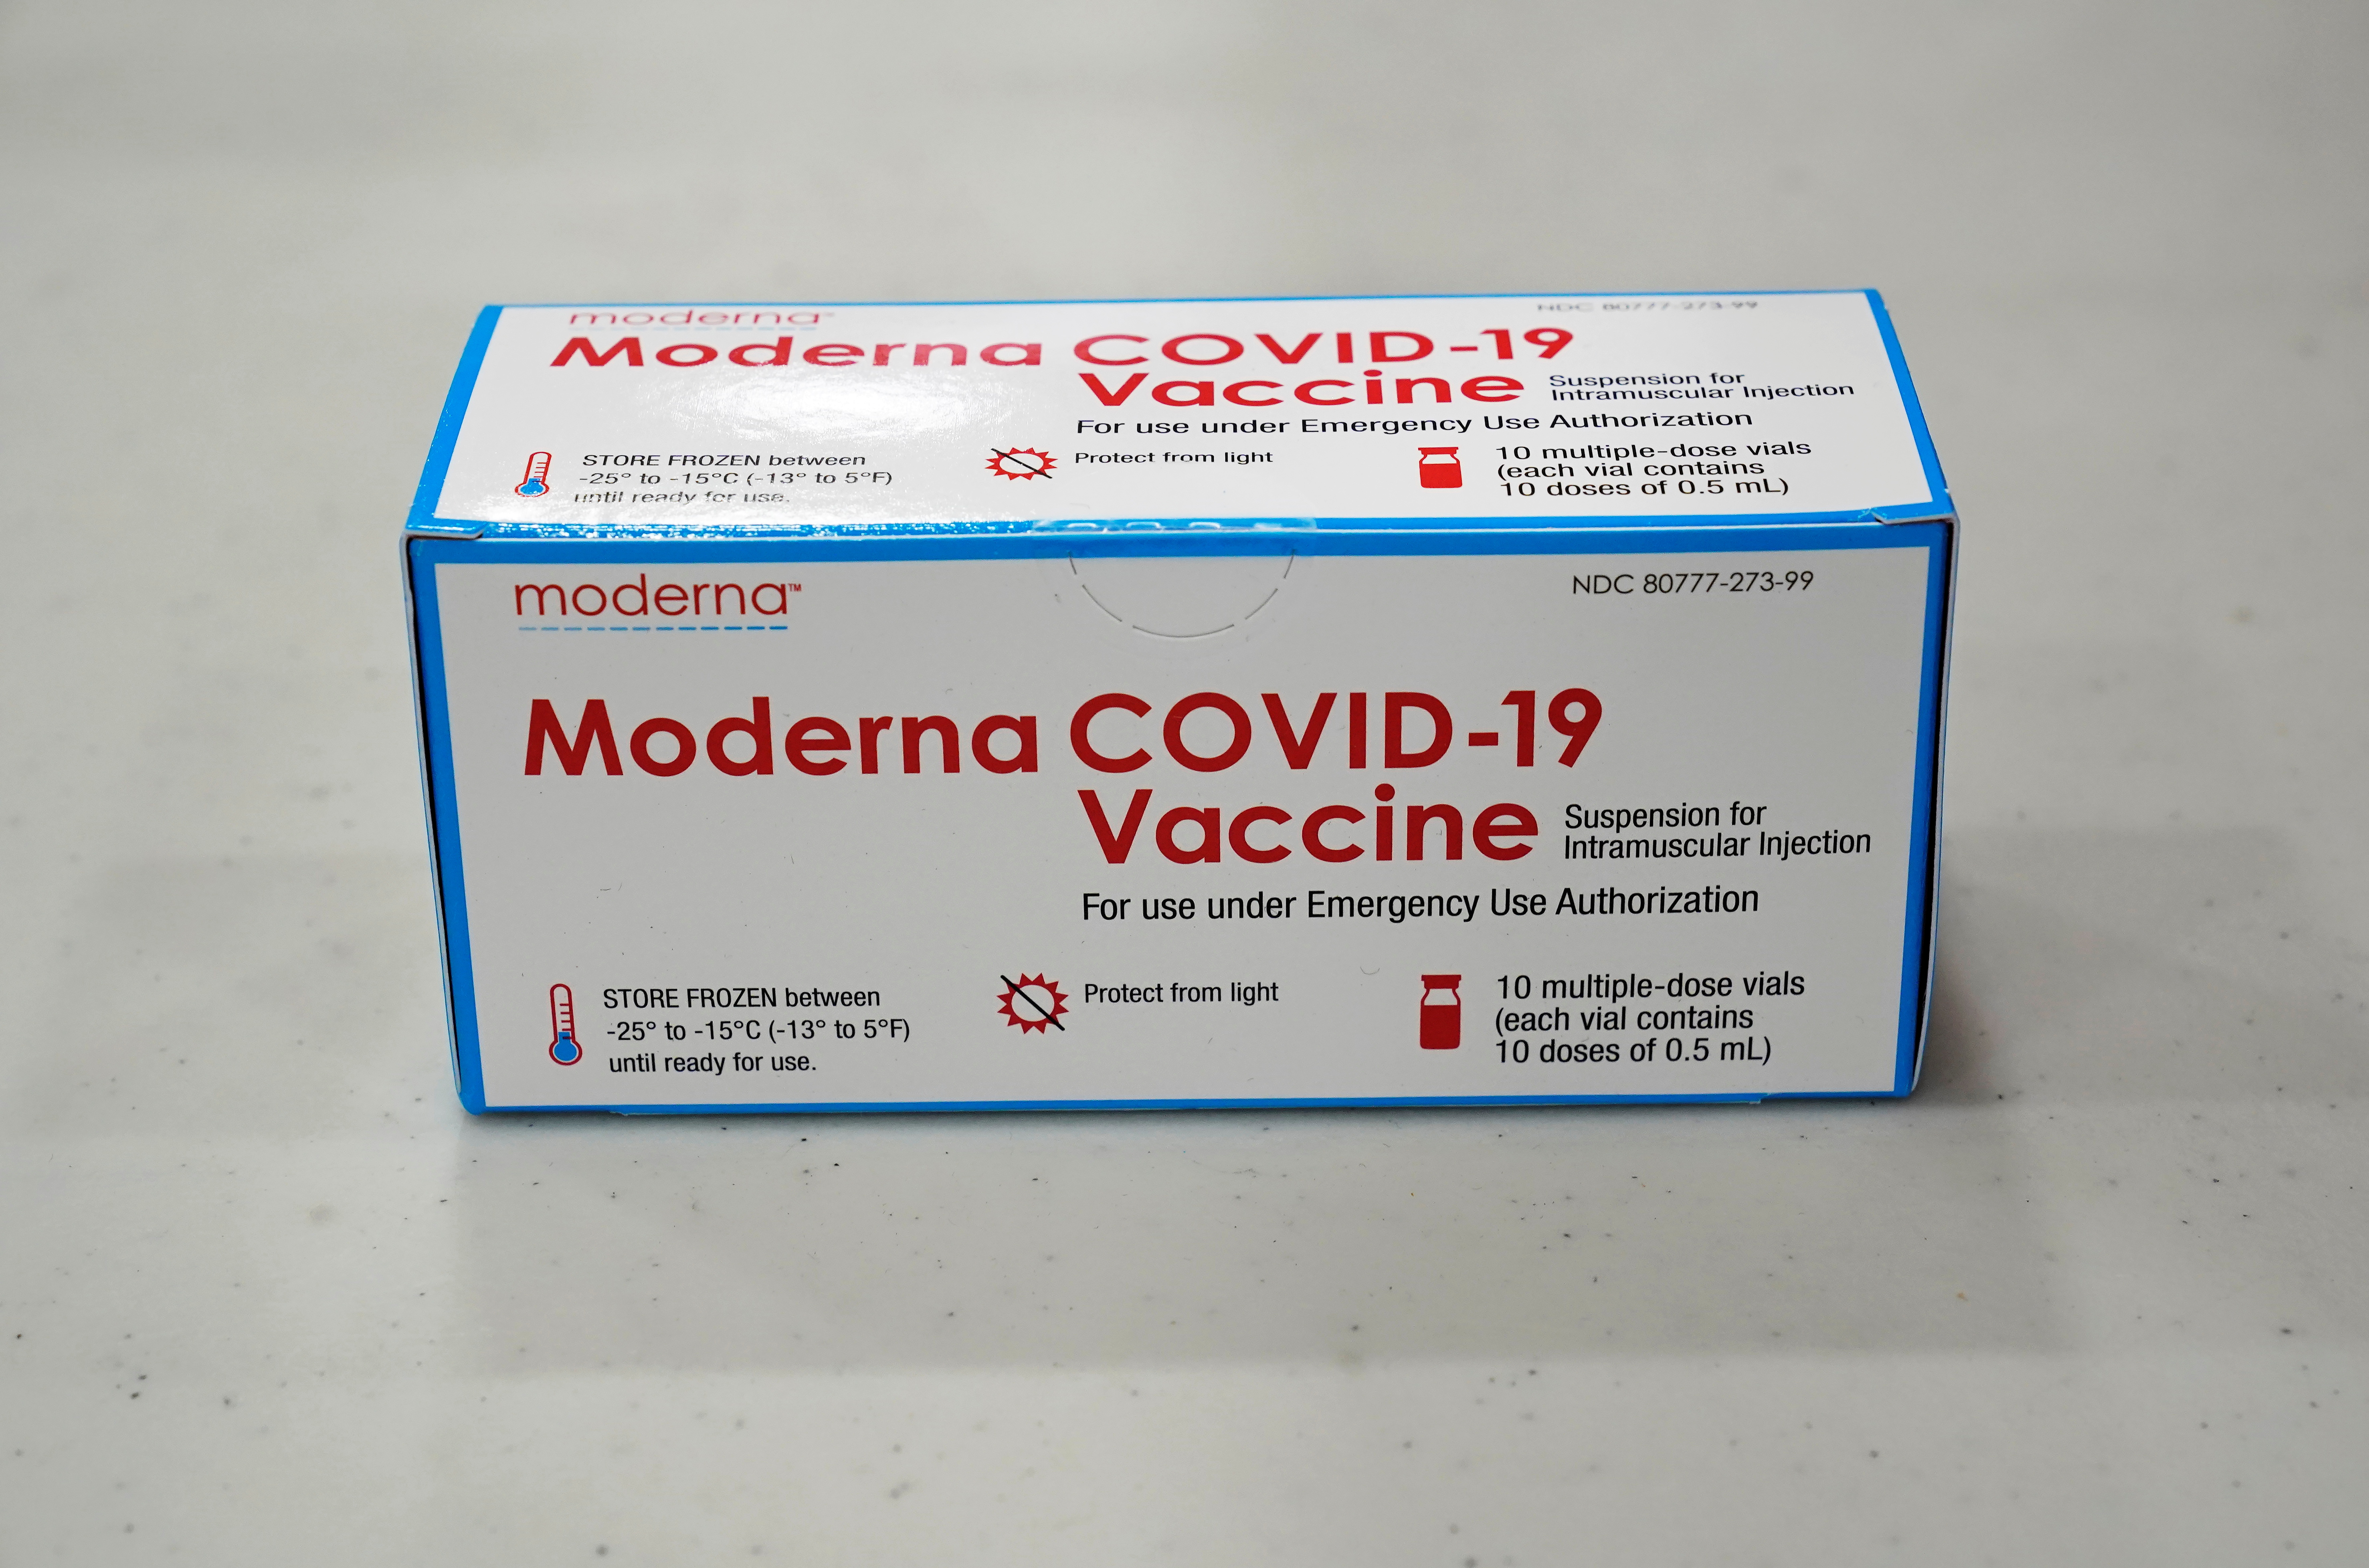 Moderna's COVID-19 vaccine at the McKesson distribution center in Olive Branch, Mississippi